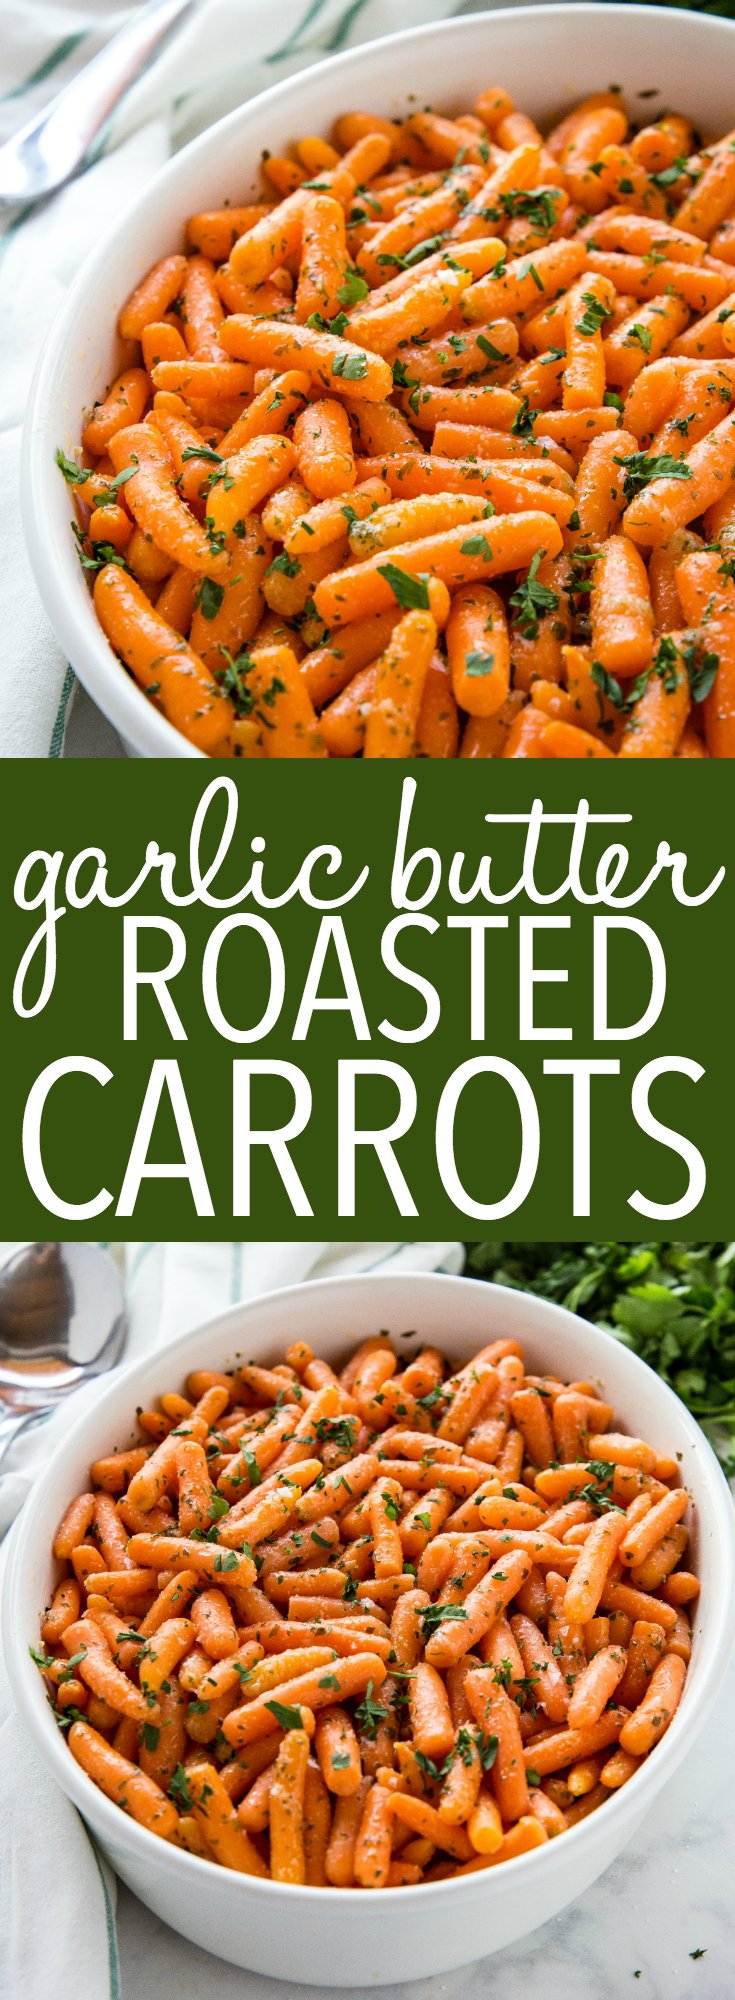 These Garlic Butter Roasted Carrots make the perfect holiday side dish for your Christmas or Thanksgiving dinner! They're on the table in 30 minutes or less with only 4 ingredients! Recipe from thebusybaker.ca! #thanksgiving #christmas #holiday #dinner #sidedish #easysidedish #vegetarian #vegan #butter #roasted #carrots #vegetables #recipe via @busybakerblog